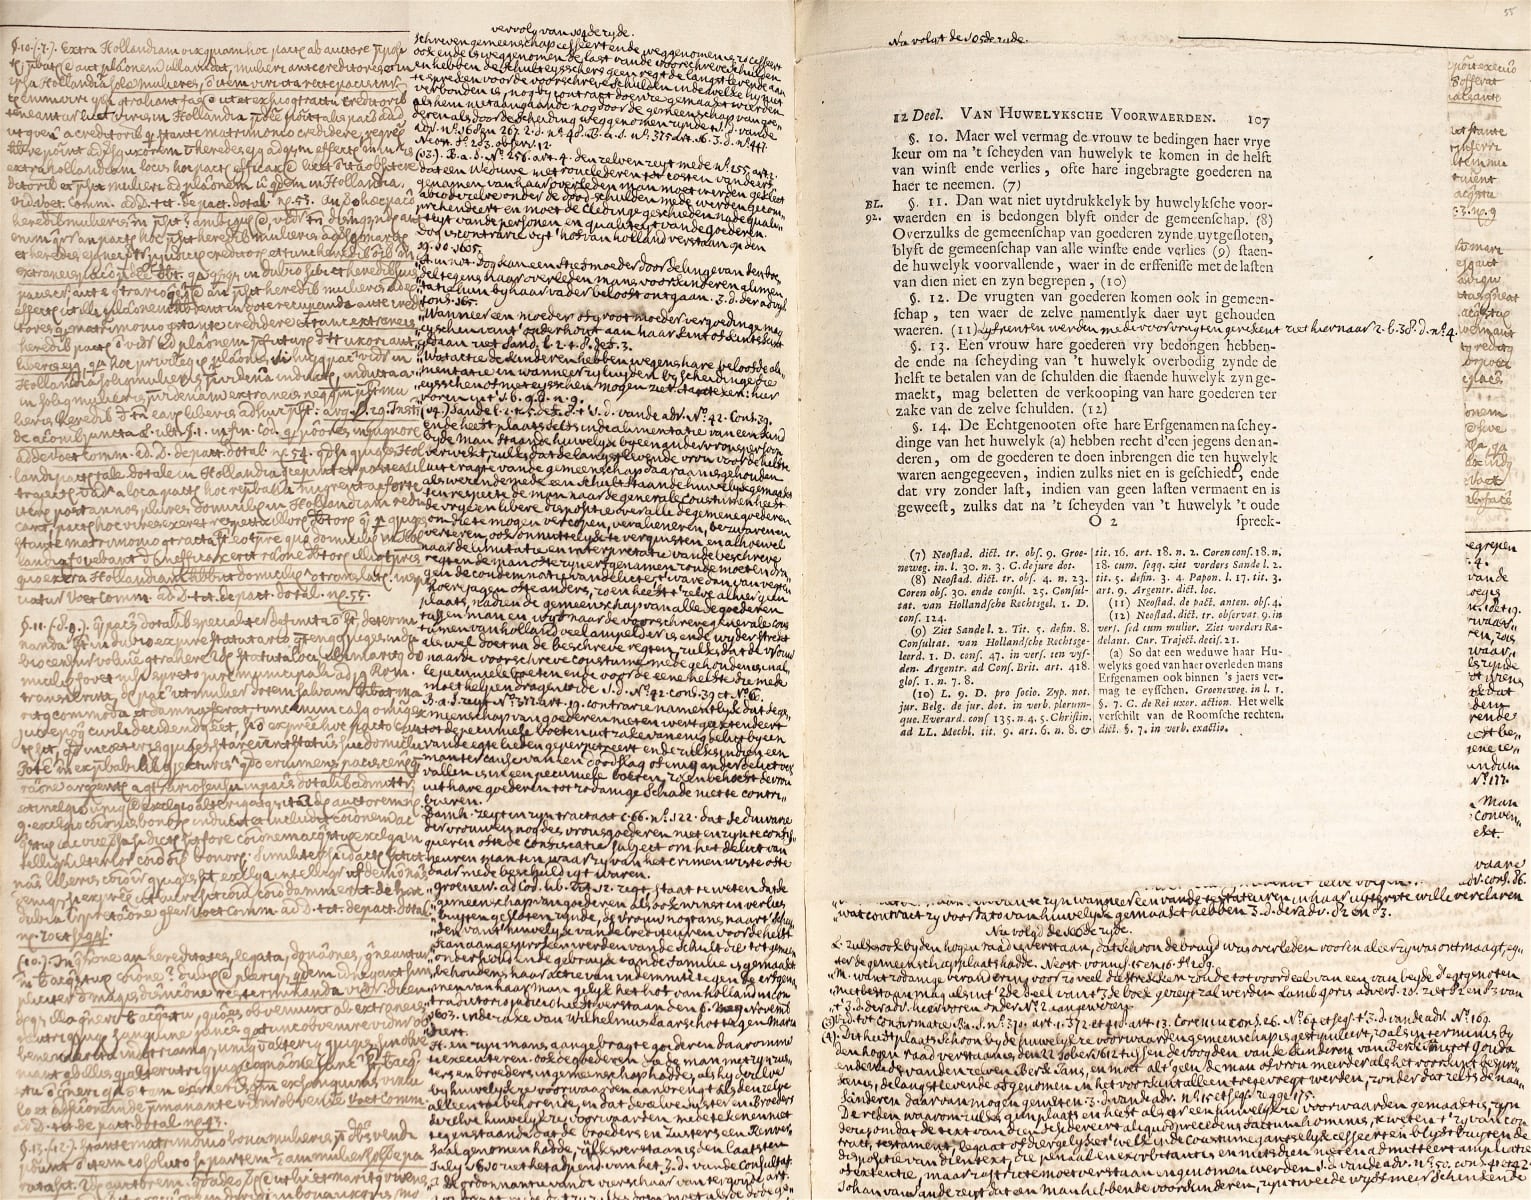 Old book pages, printed area surrounded by hand written script. Links to larger version of this image.